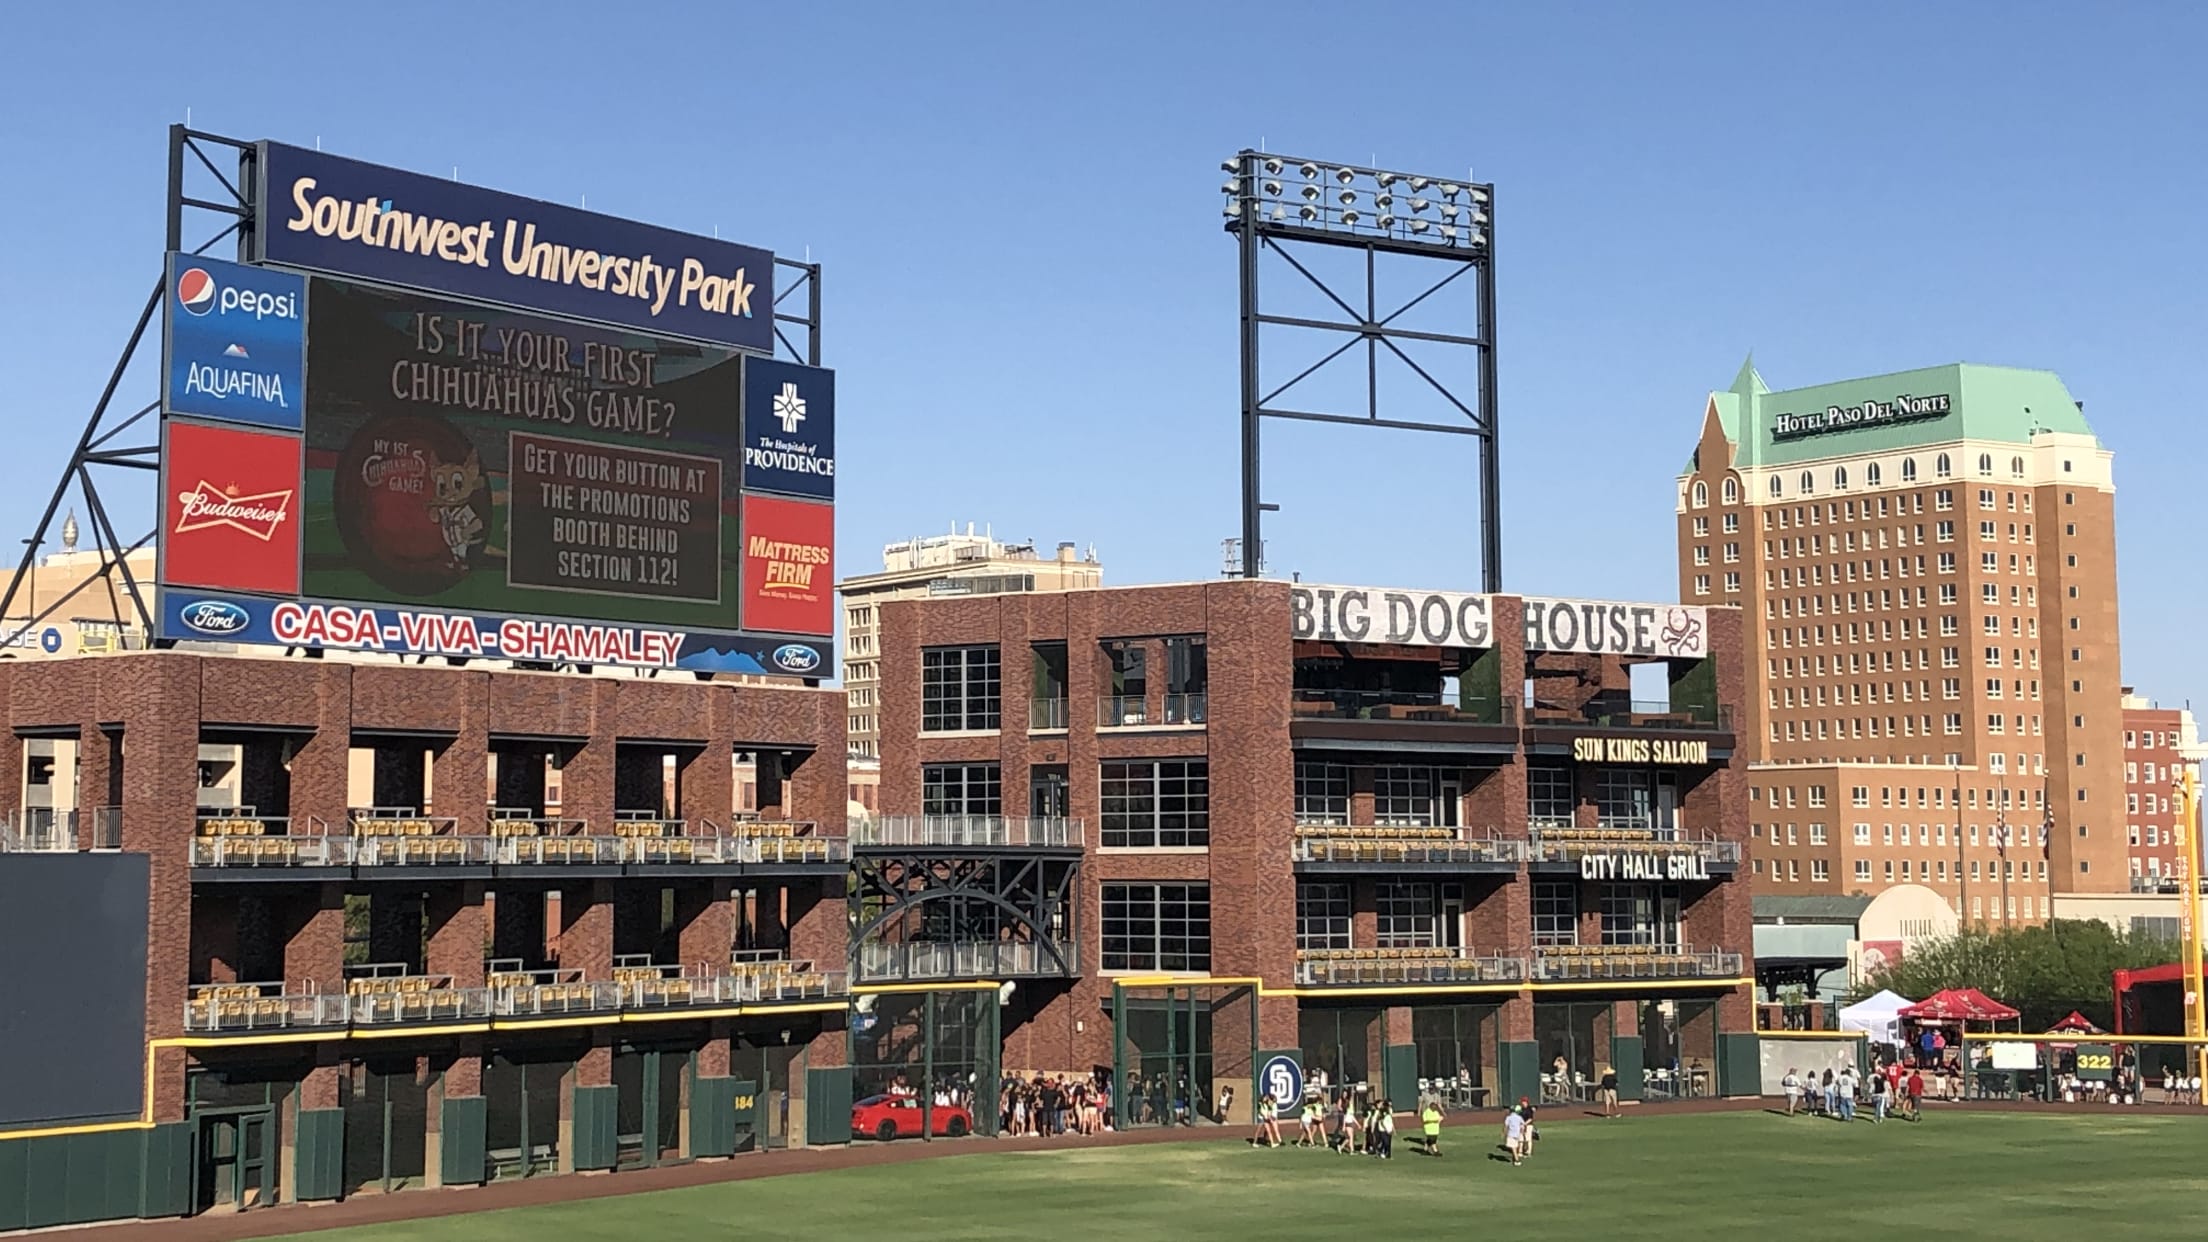 Chihuahuas' Nickelodeon Night brings out families to Southwest University  Park